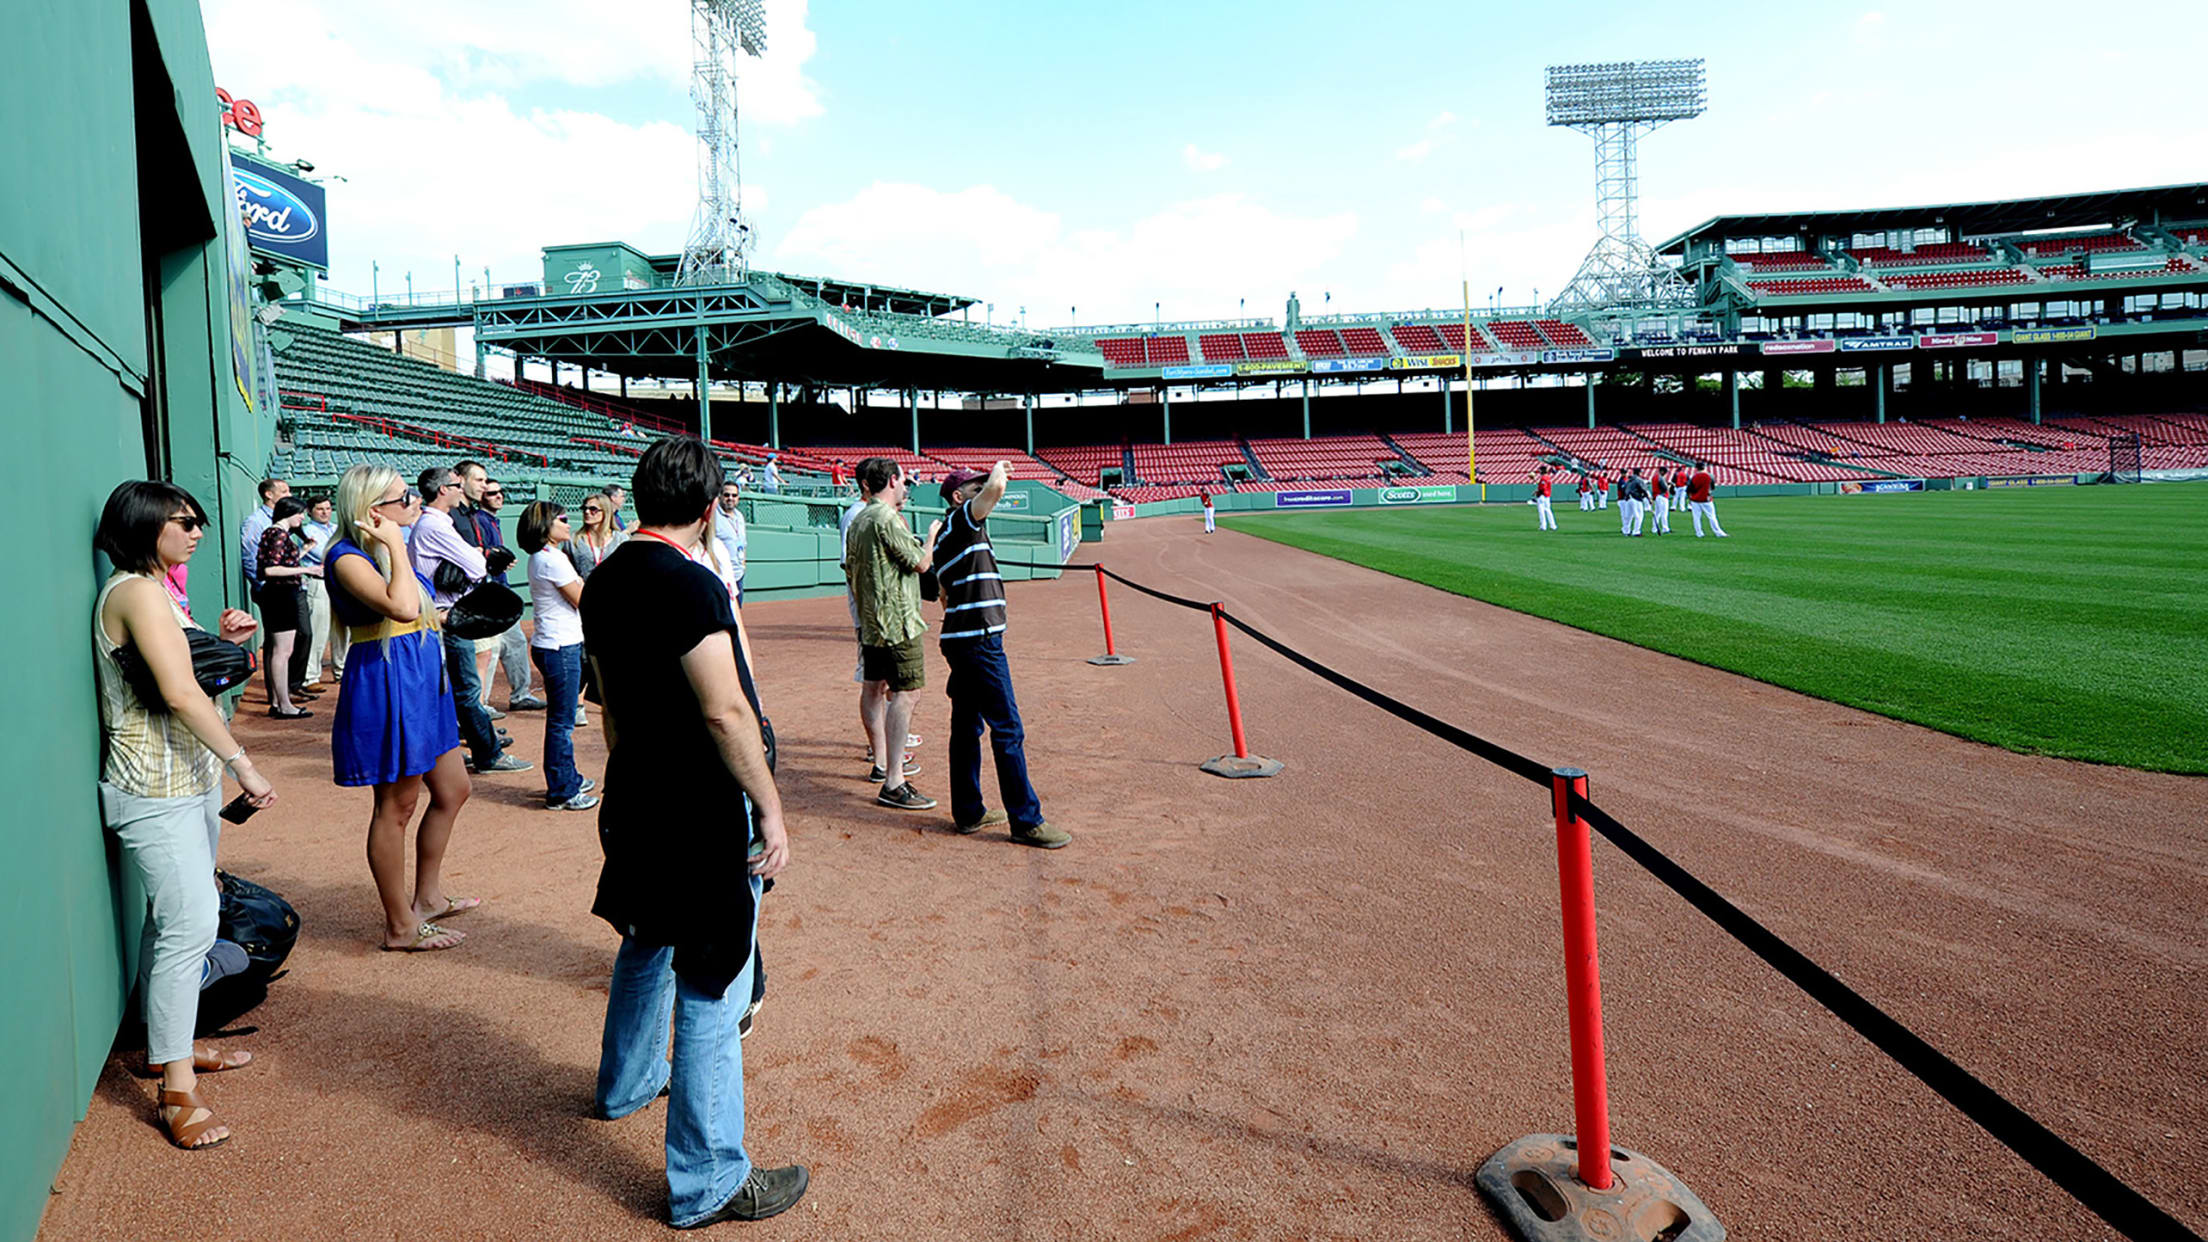 Fenway Park changes: Boston Red Sox put batting cages in concourse, turn  suites into locker rooms as summer camp begins 